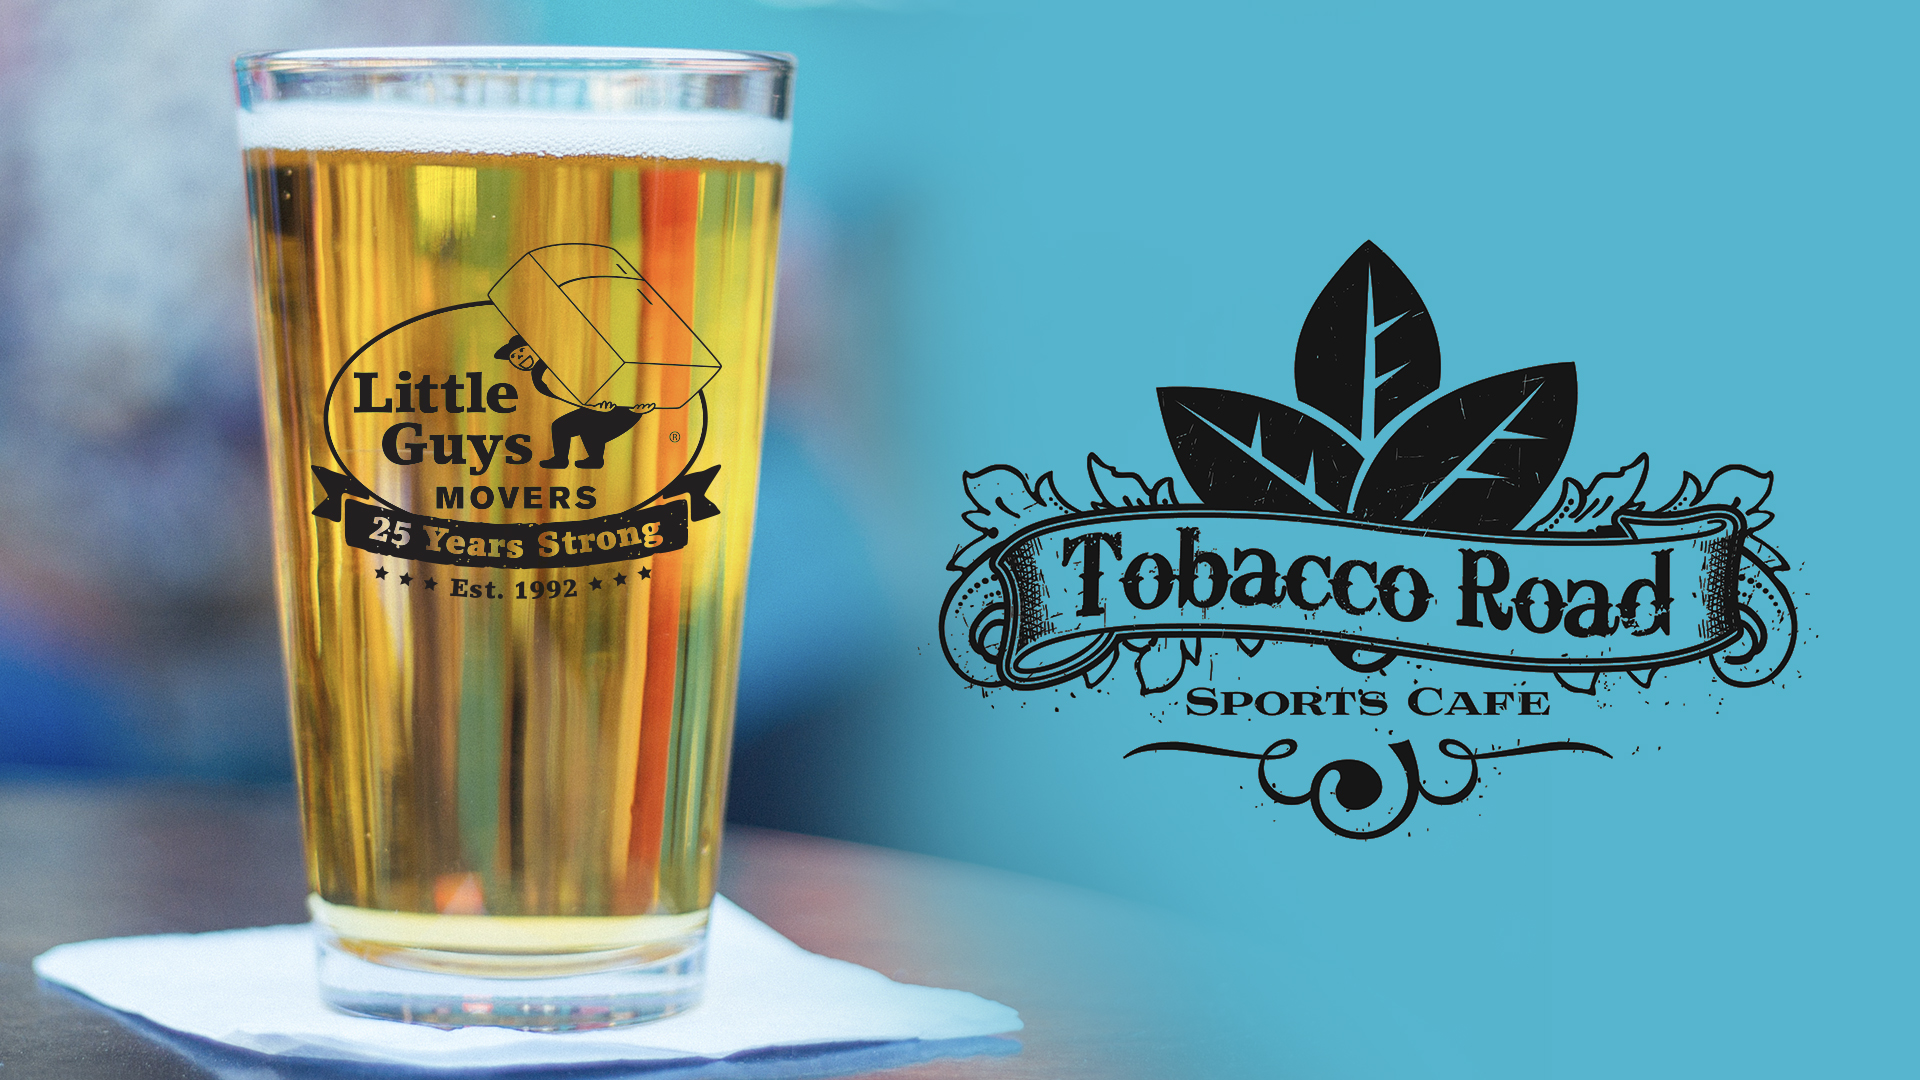 Tobacco Road and Little Guys Movers branded pint glass image